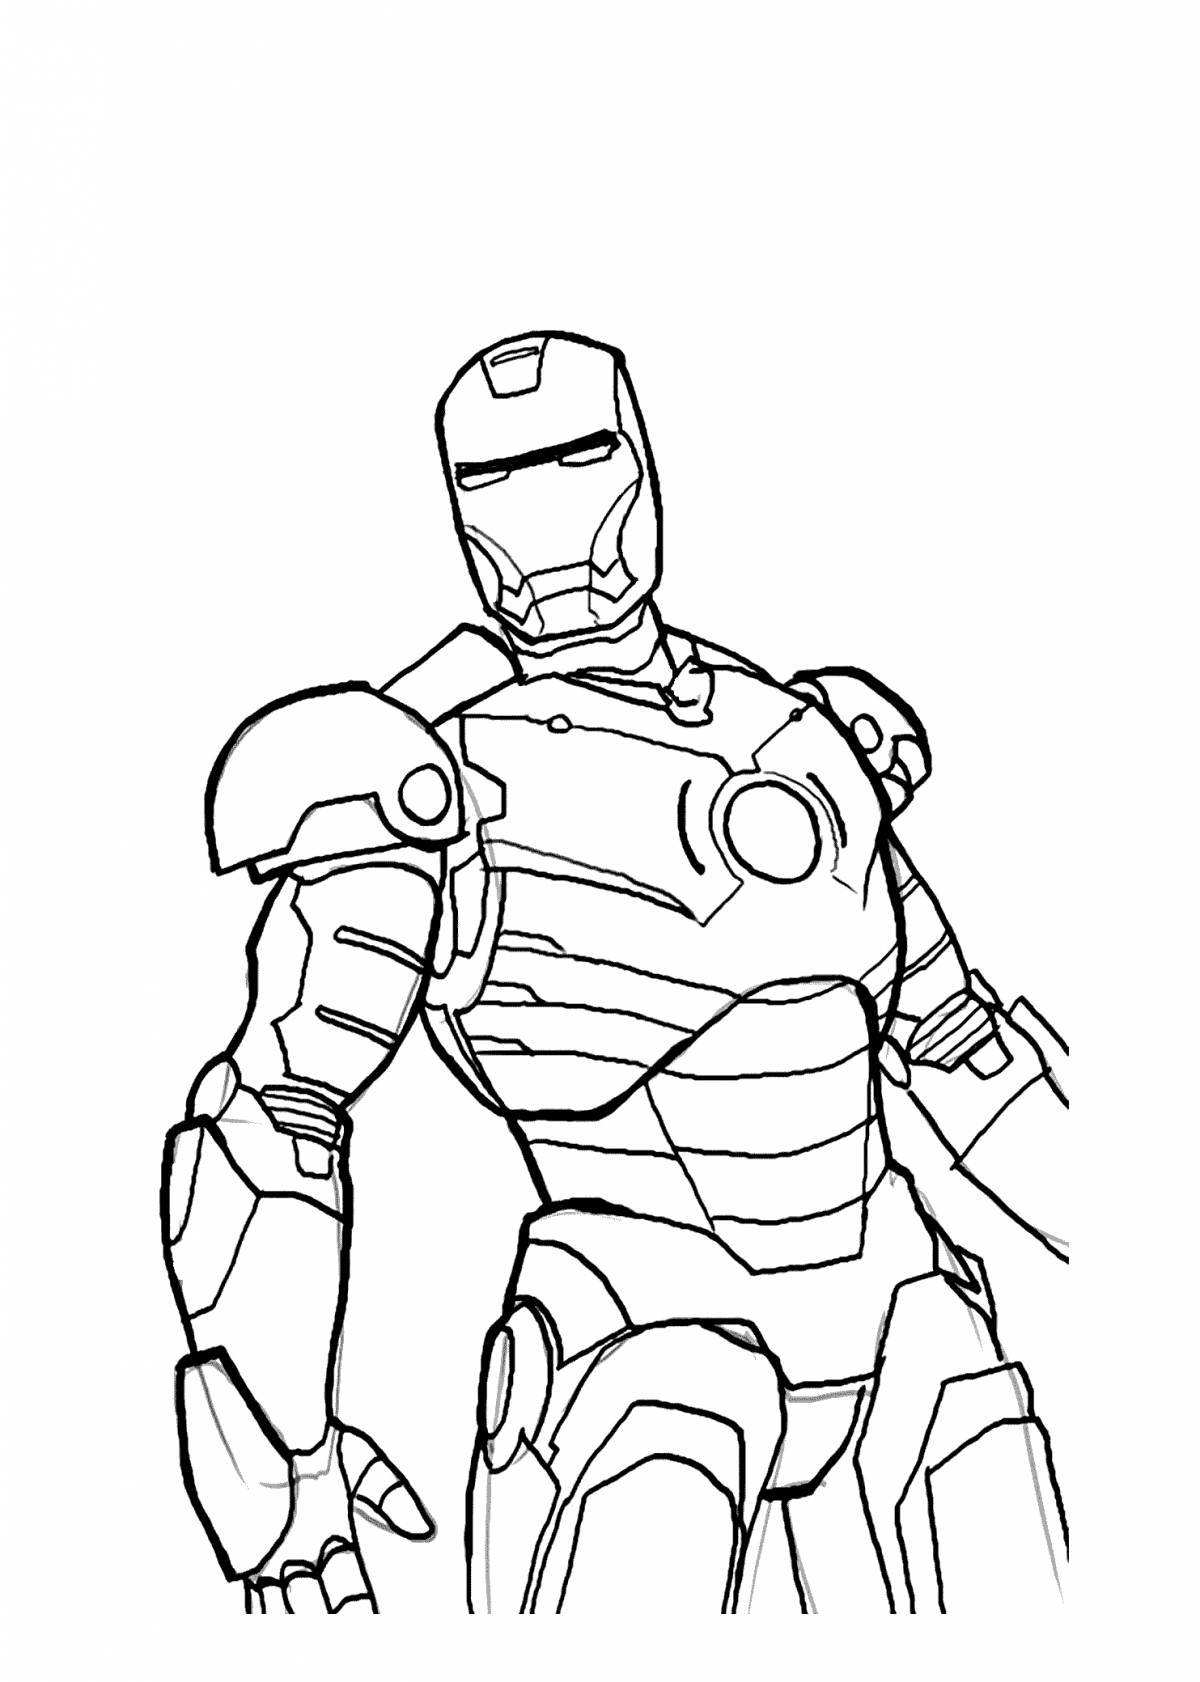 Bold superhero coloring pages for kids